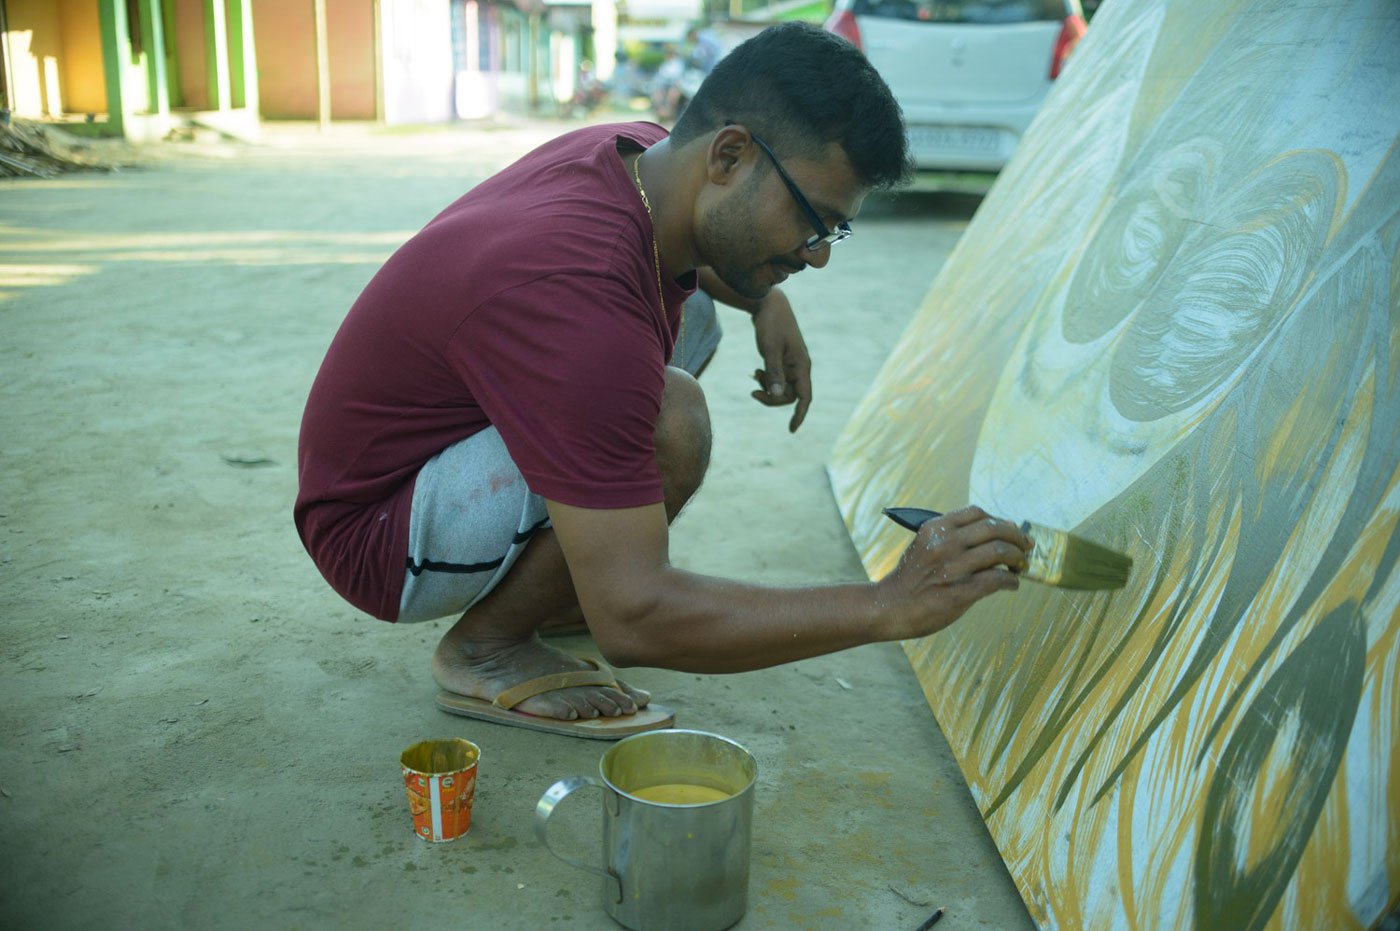 For the last 11 years, Bastav Saikia has been travelling to Majuli from Nagaon district to work on sets for the festival. Here, he is painting the backdrop for Kansa's throne to be used at the Garamur performance